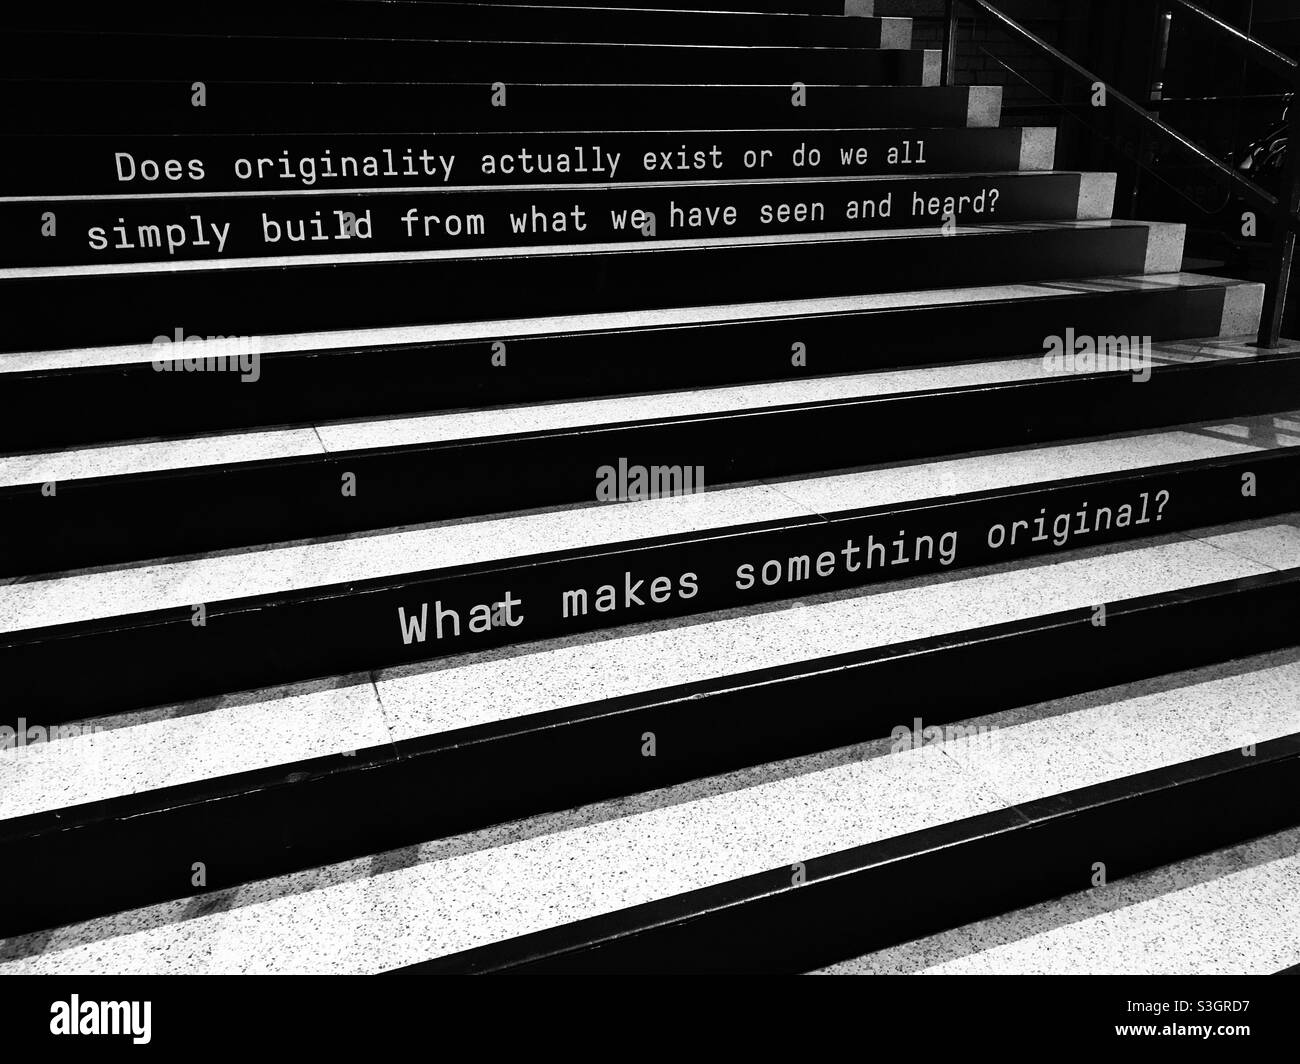 Quotes on the steps of the Royal Northern College of Music, Manchester Stock Photo